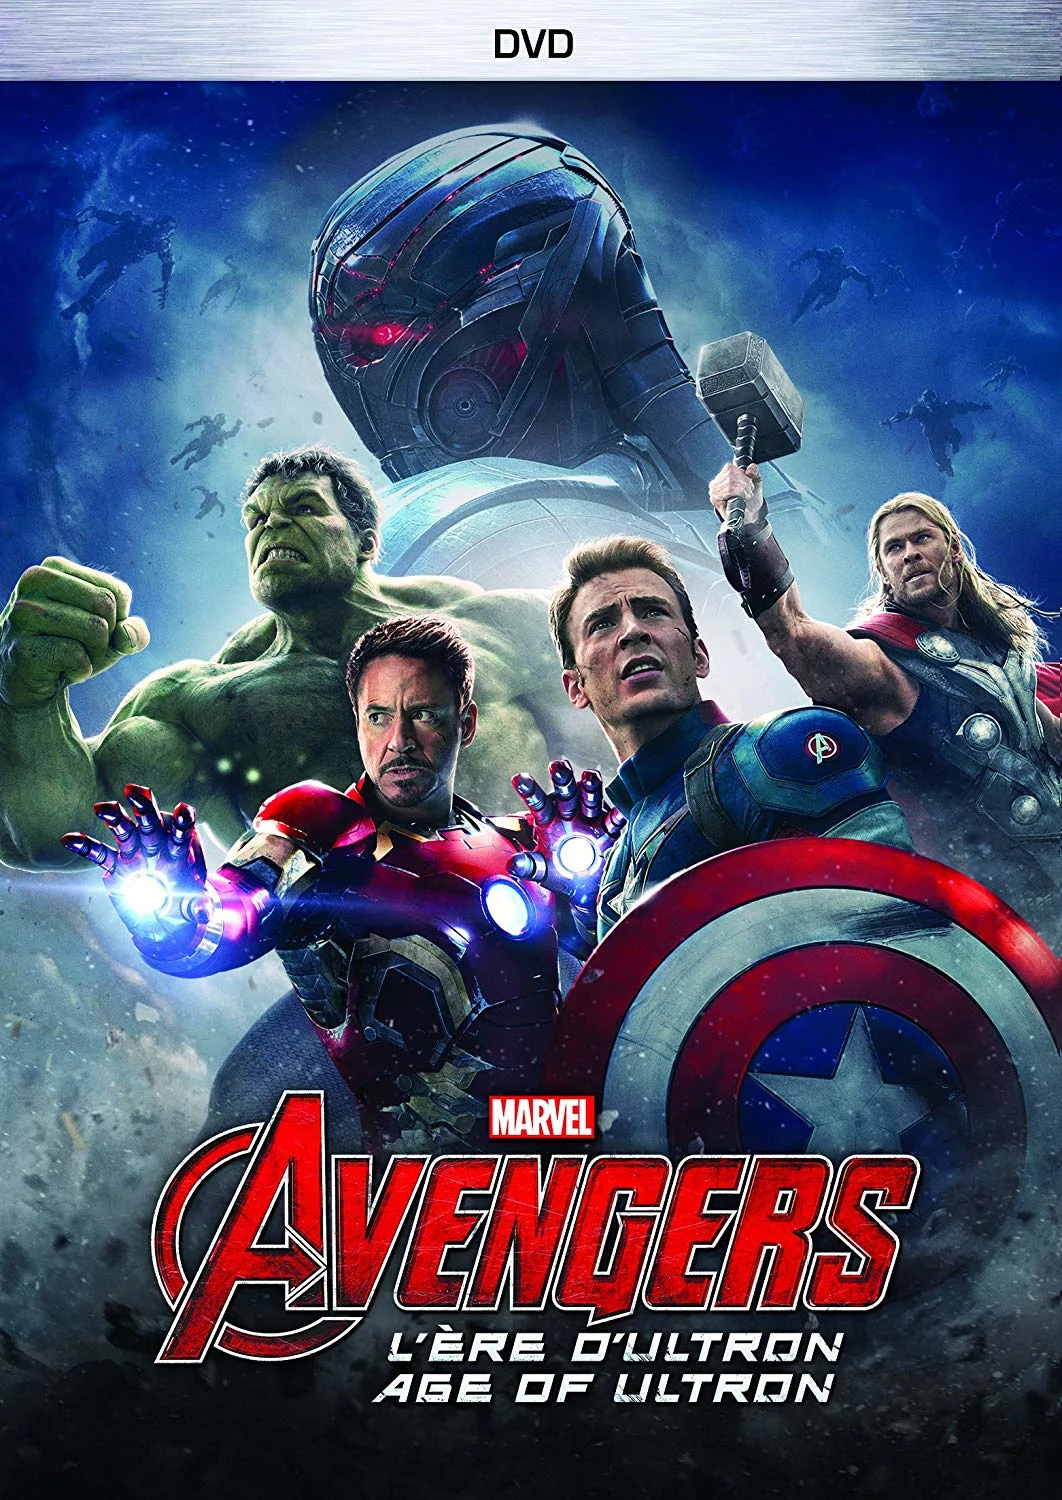 Avengers: Age Of Ultron (DVD) on MovieShack